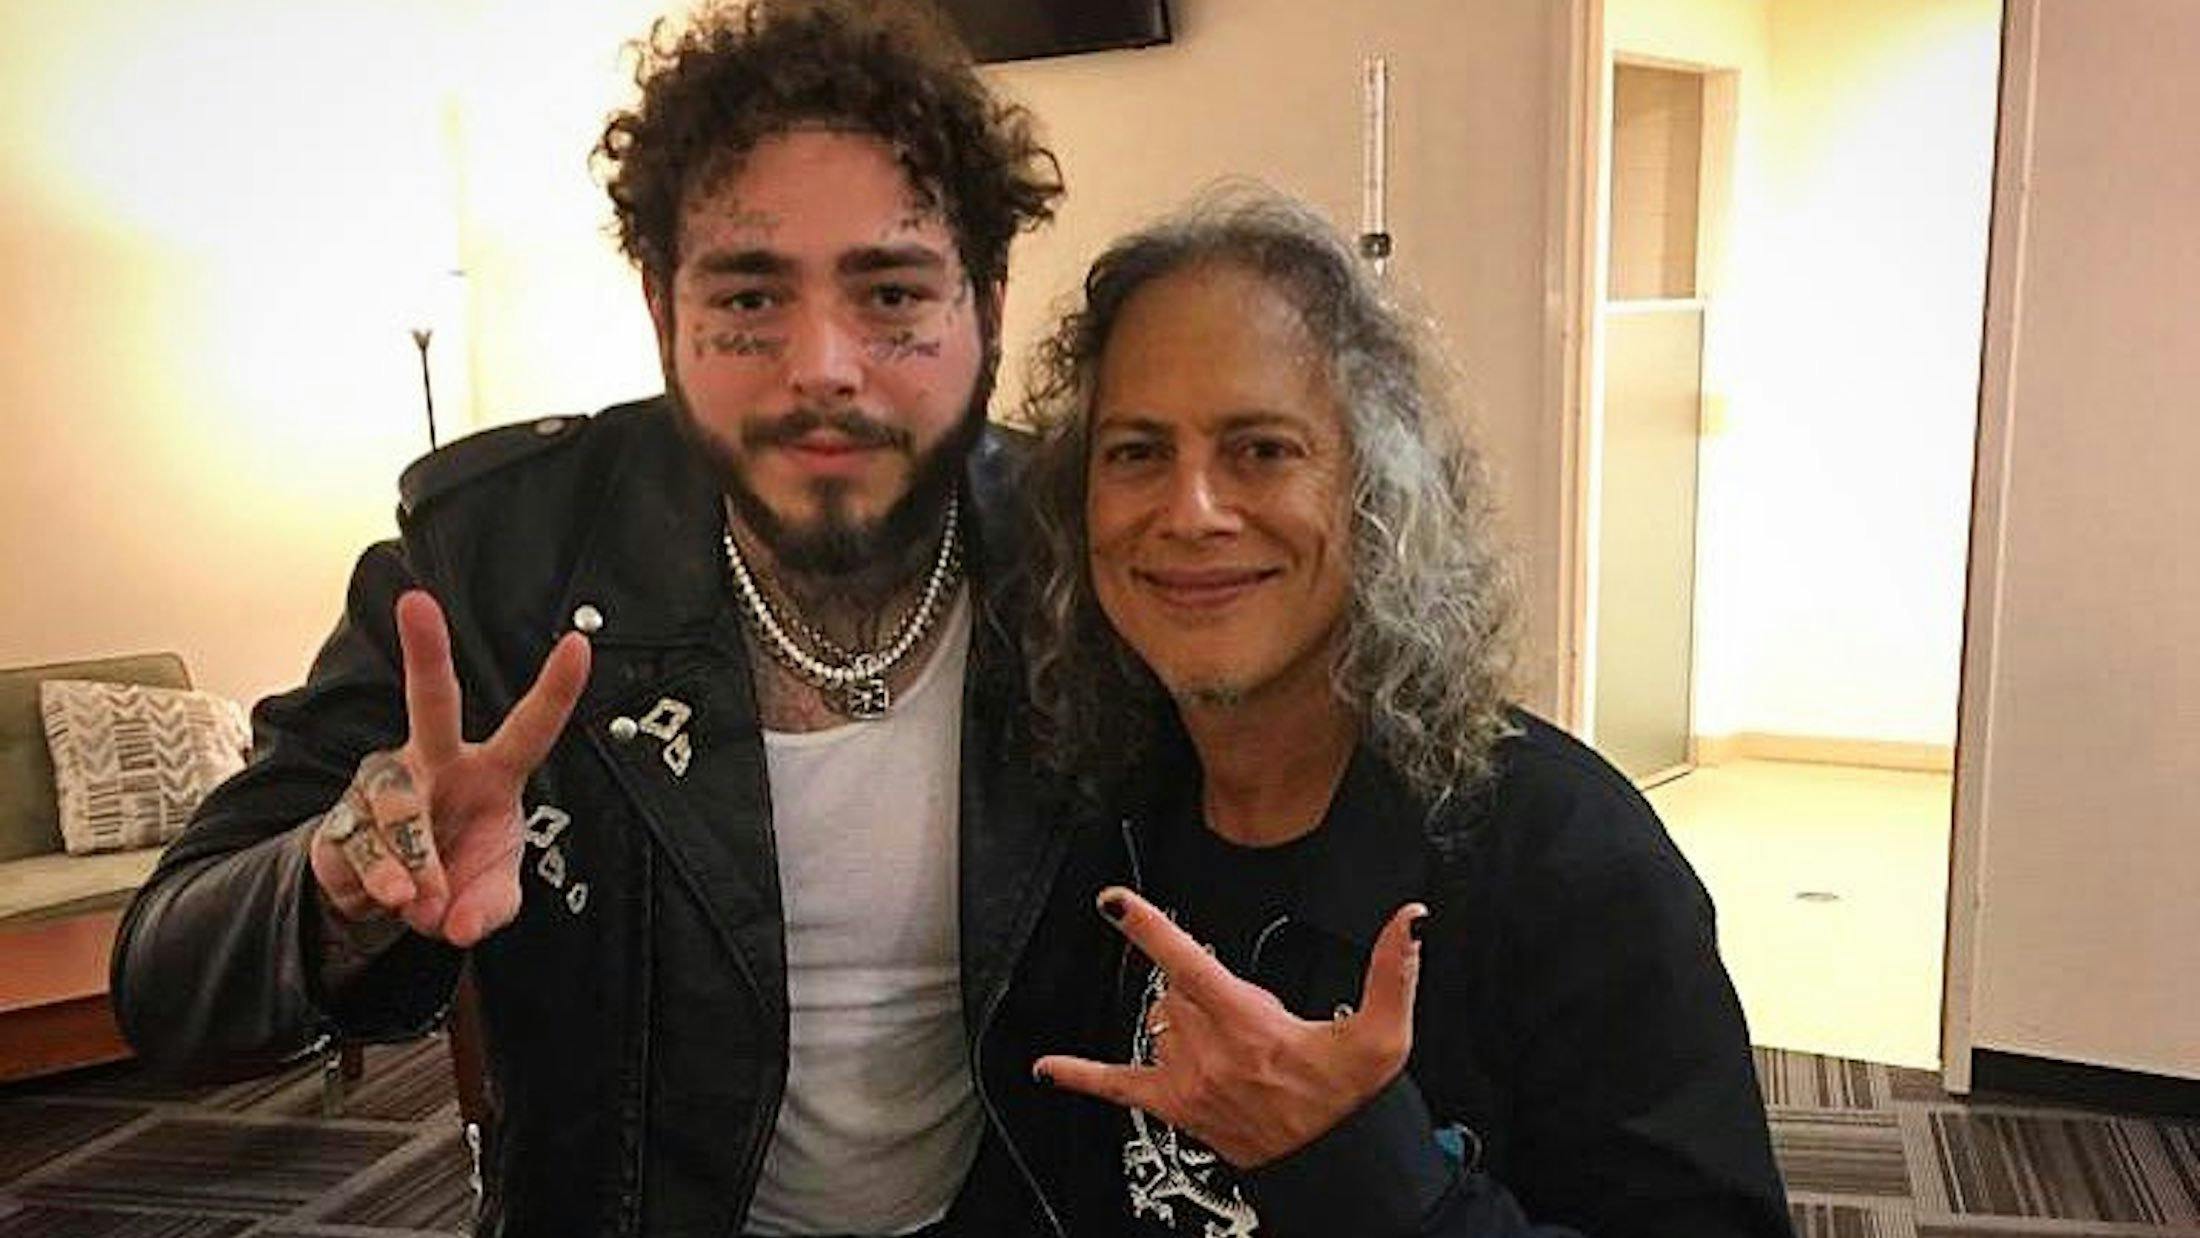 Here's Some Photos Of Metallica Hanging Out With Post Malone